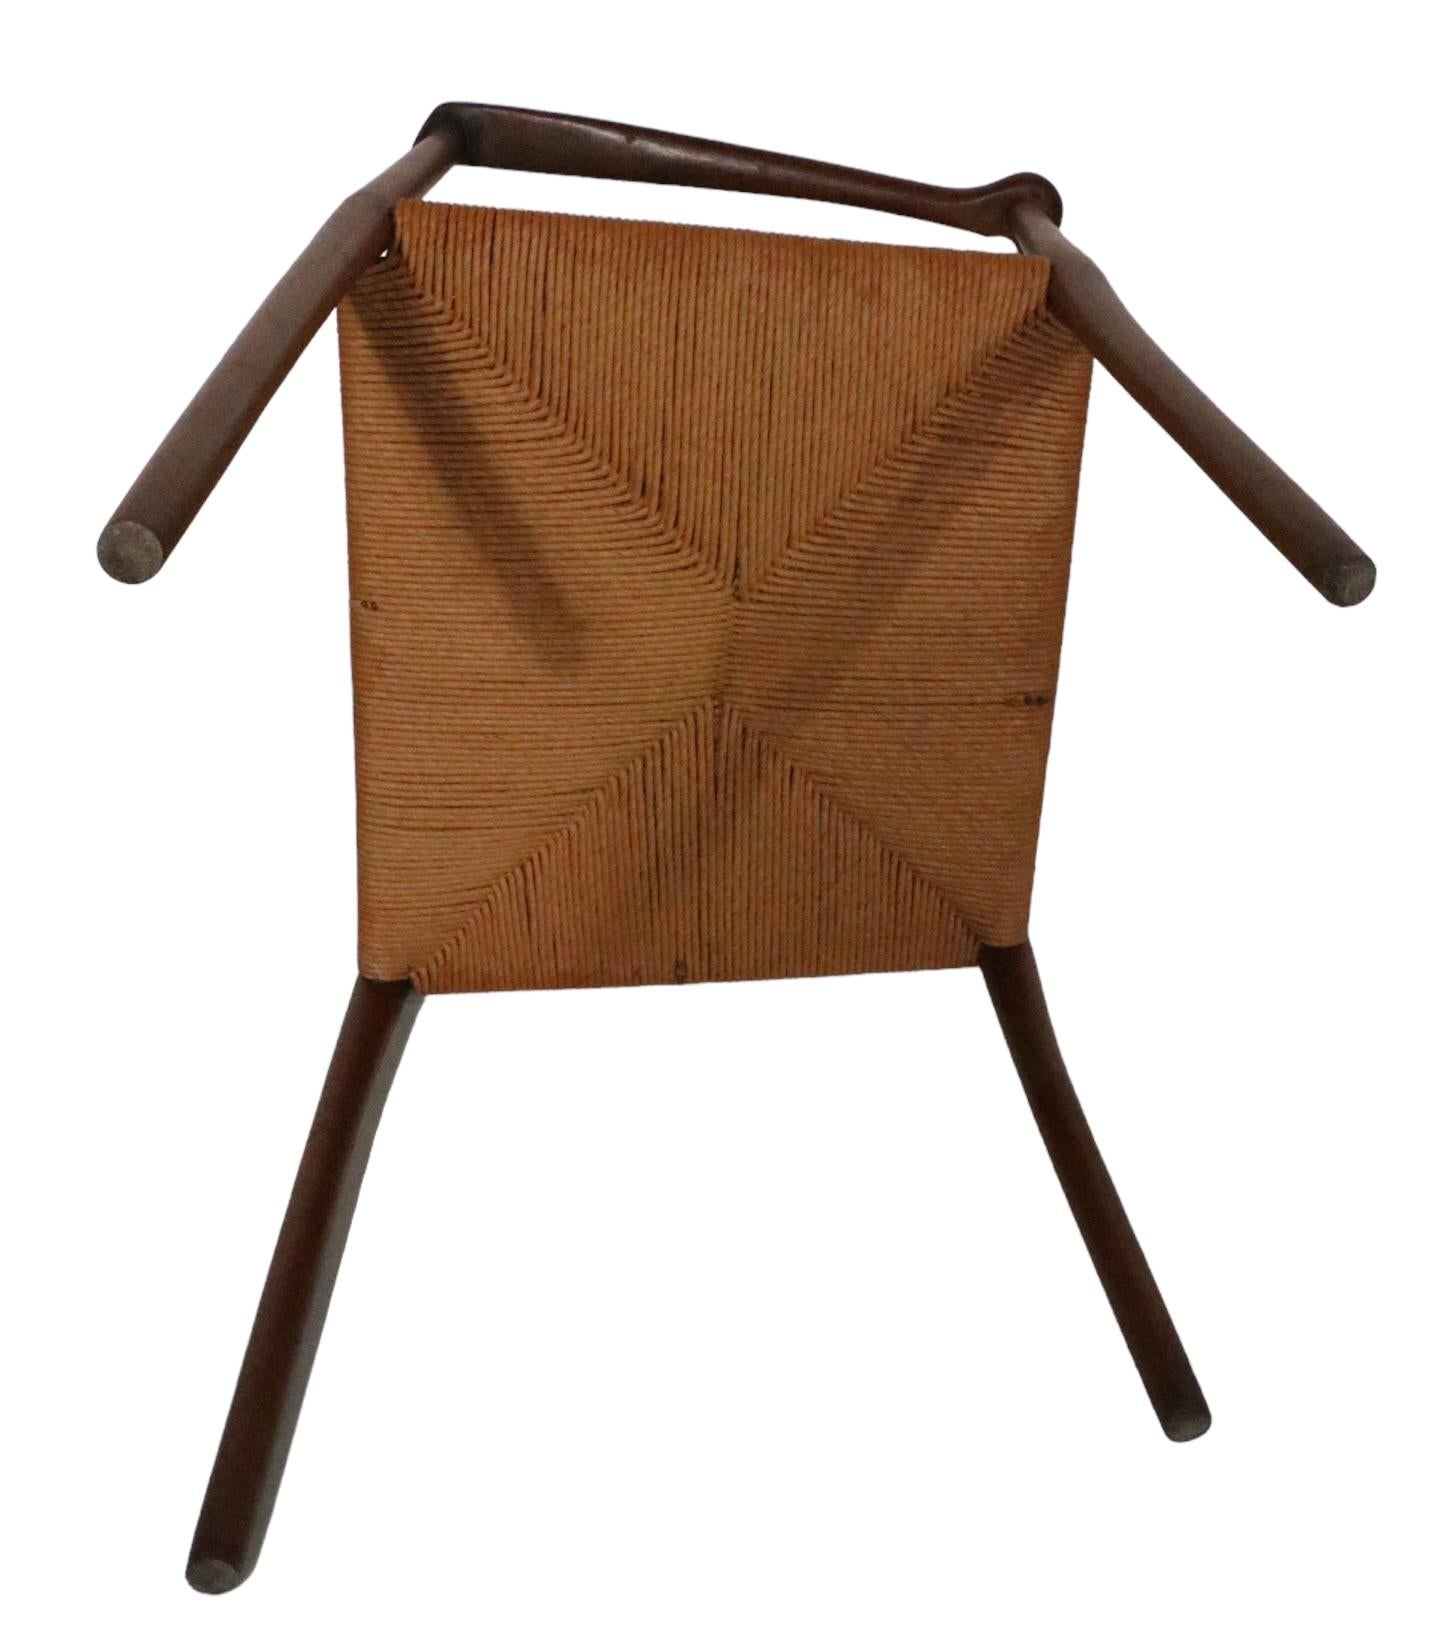 Architectural Danish Mid-Century Modern constructed of solid walnut with a rope seat. The chair exhibits the expected attention to Craft found in high end level Danish woodwork, we are not sure who made or designed the chair, and it is unsigned. The